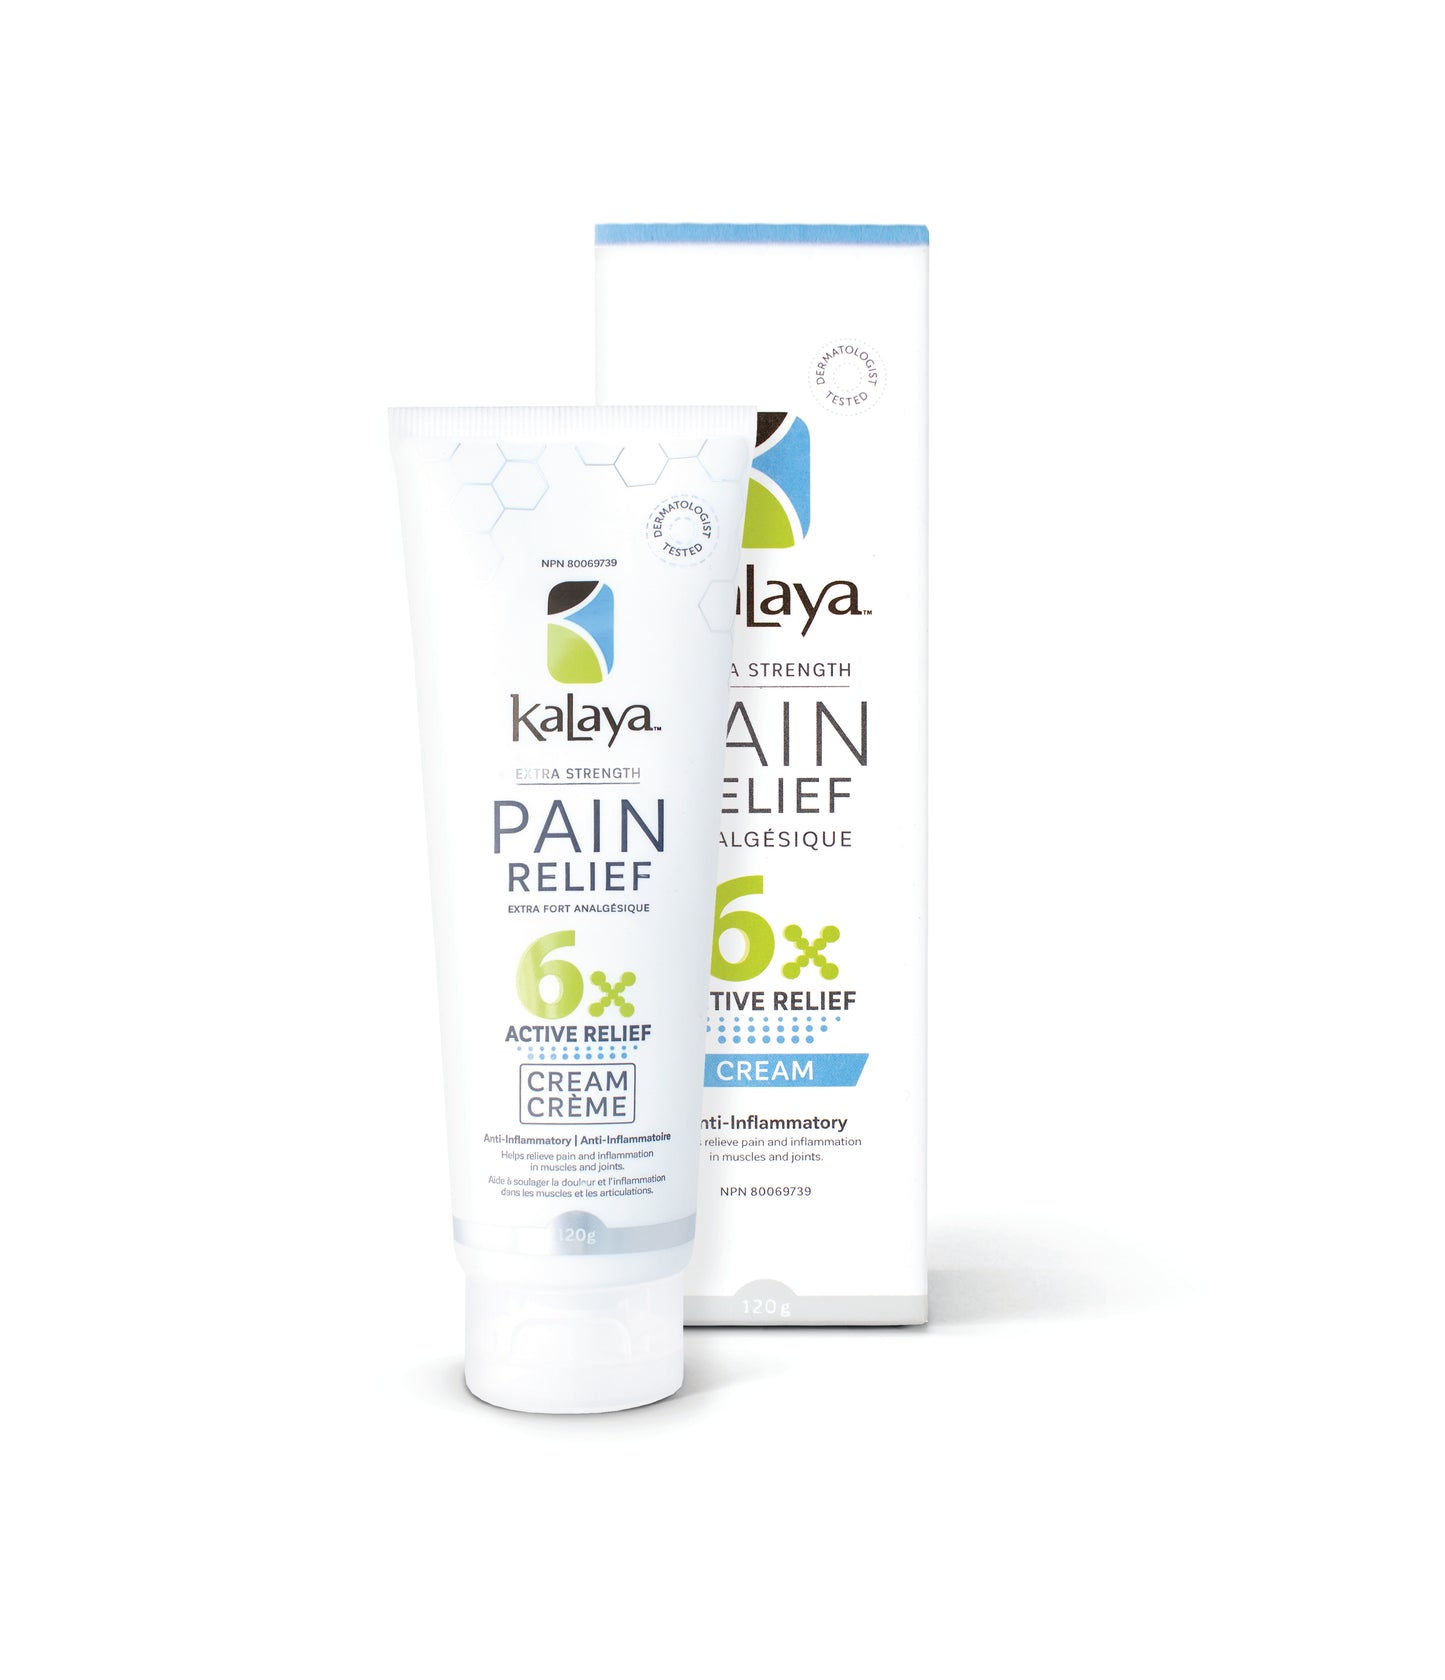 Kalaya 6x Extra Strength Pain Relief Cream - Made in Canada